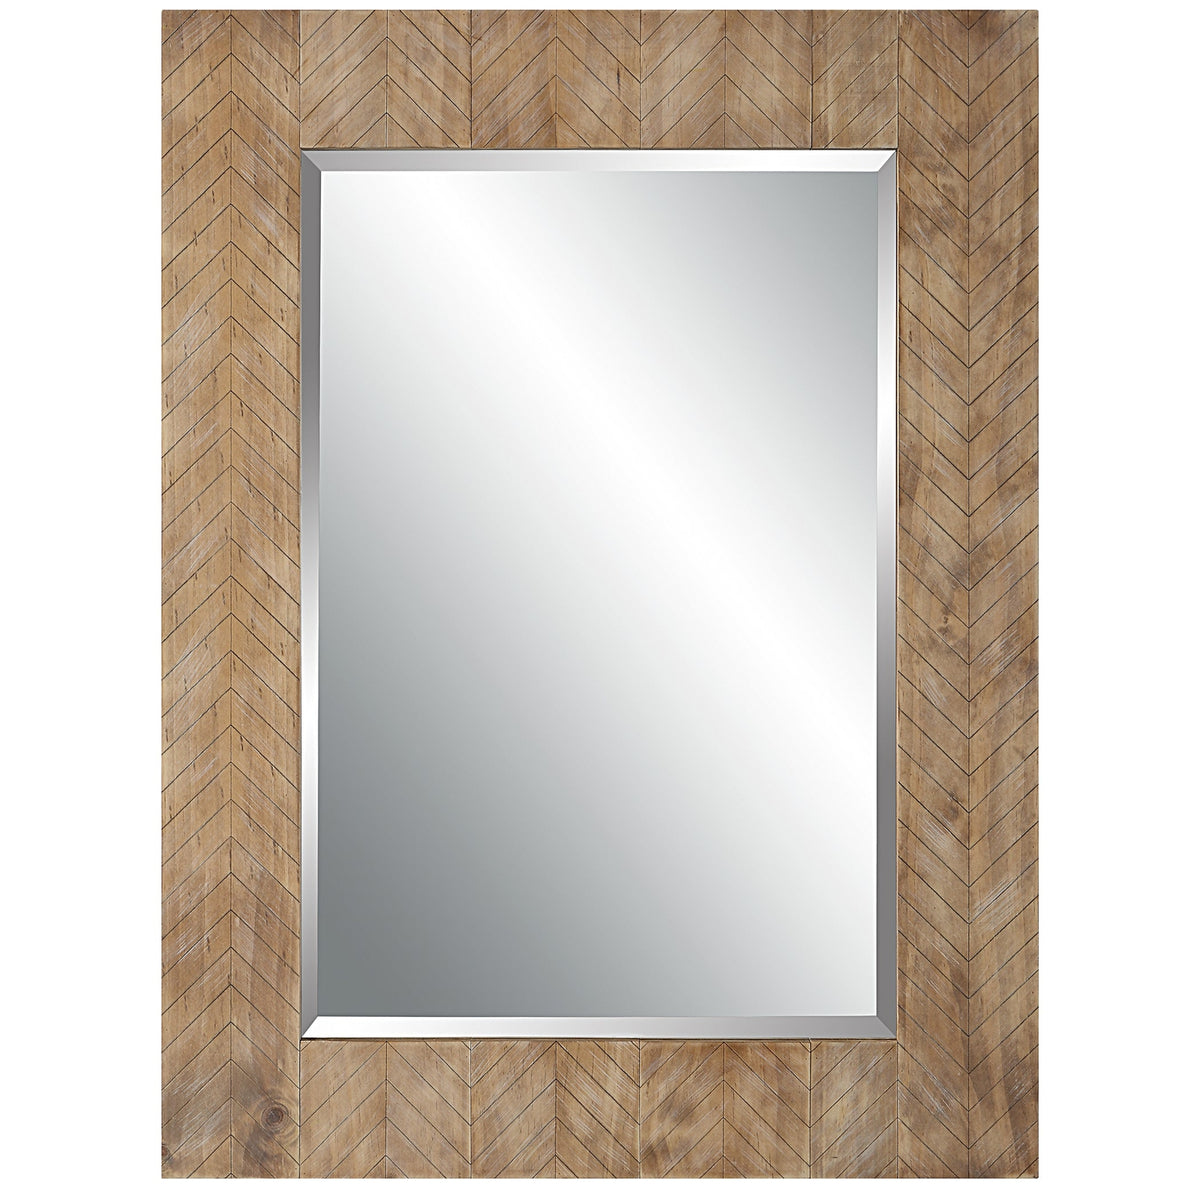 20+ Large Mirror With Wood Frame